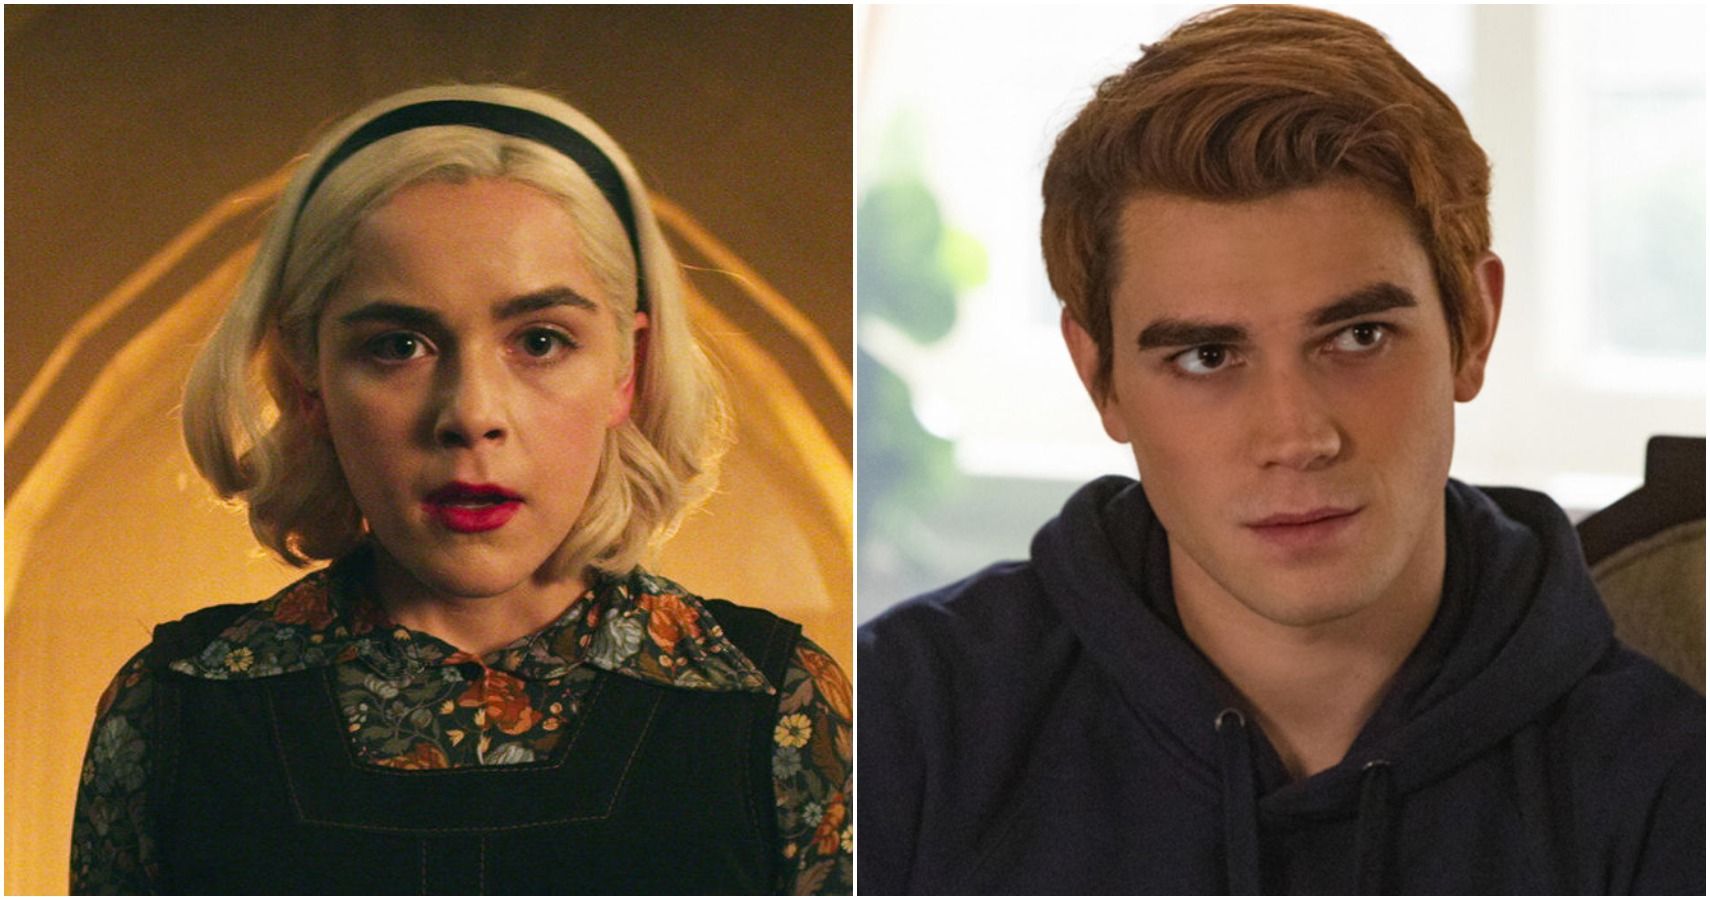 Sabrina From Chilling Adventures of Sabrina and Archie From Riverdale